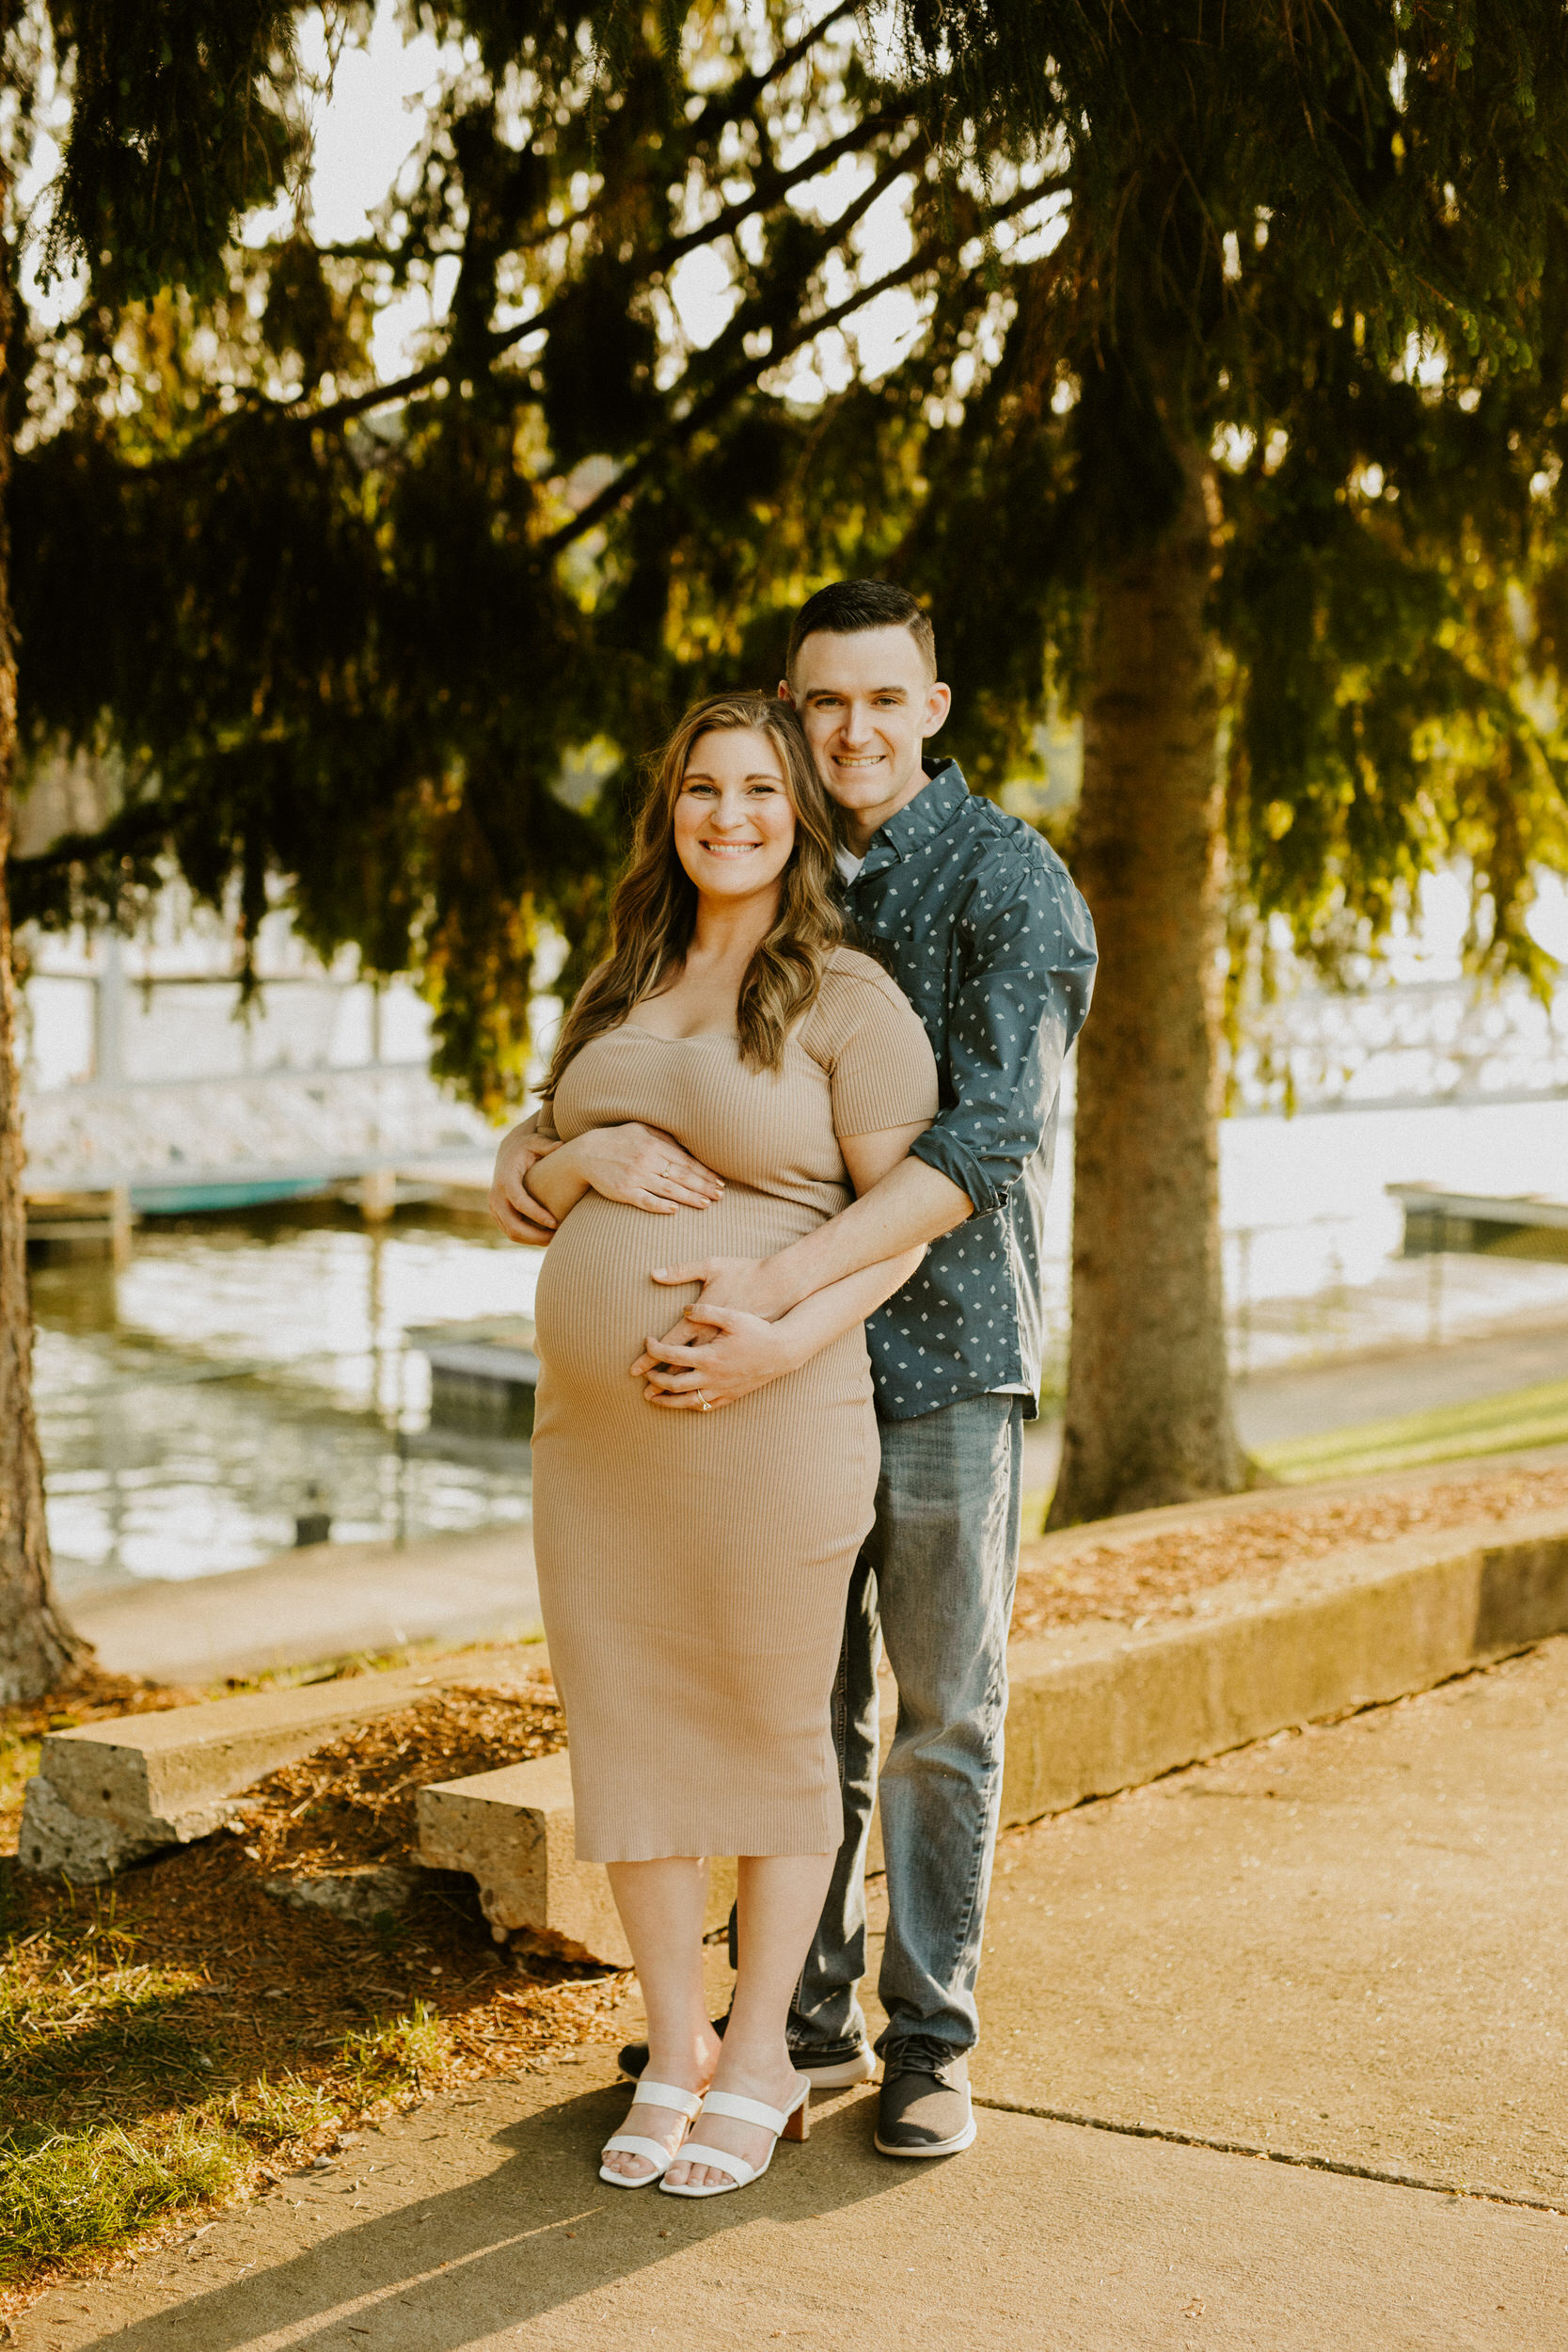 Maternity photography pittsburgh